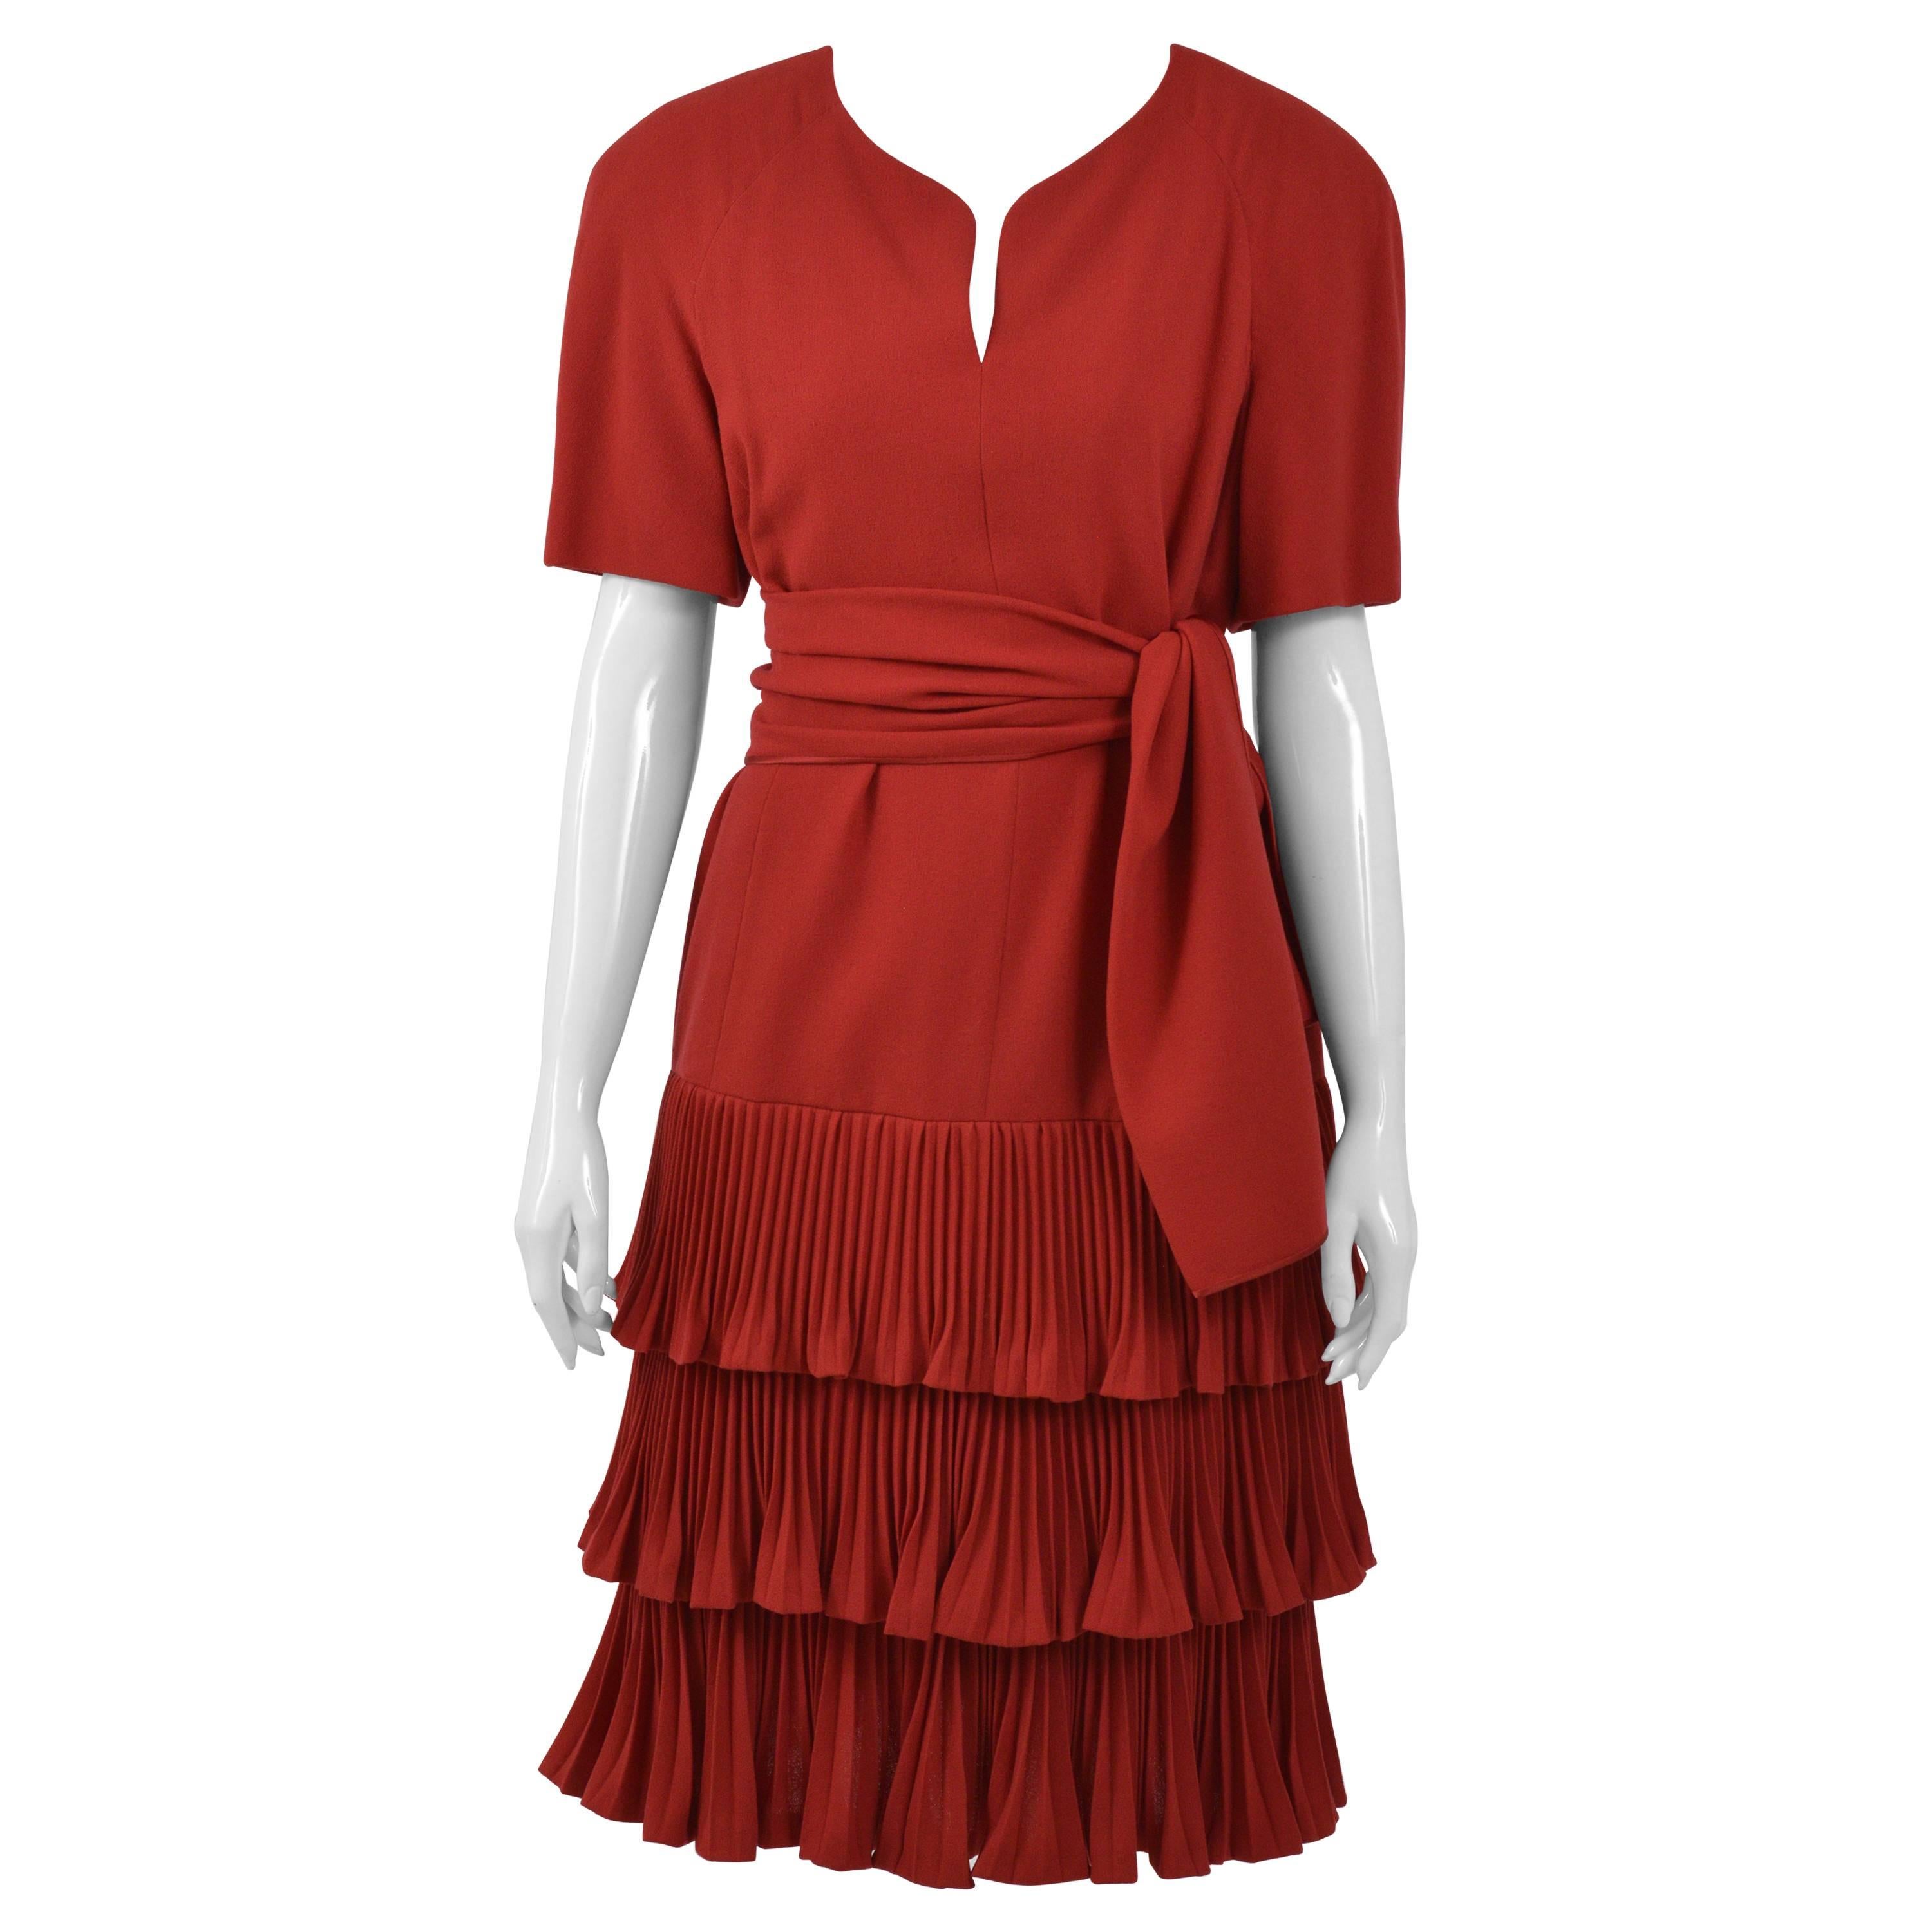 1990s VALENTINO COUTURE Red Pleateds Cocktail Dress For Sale